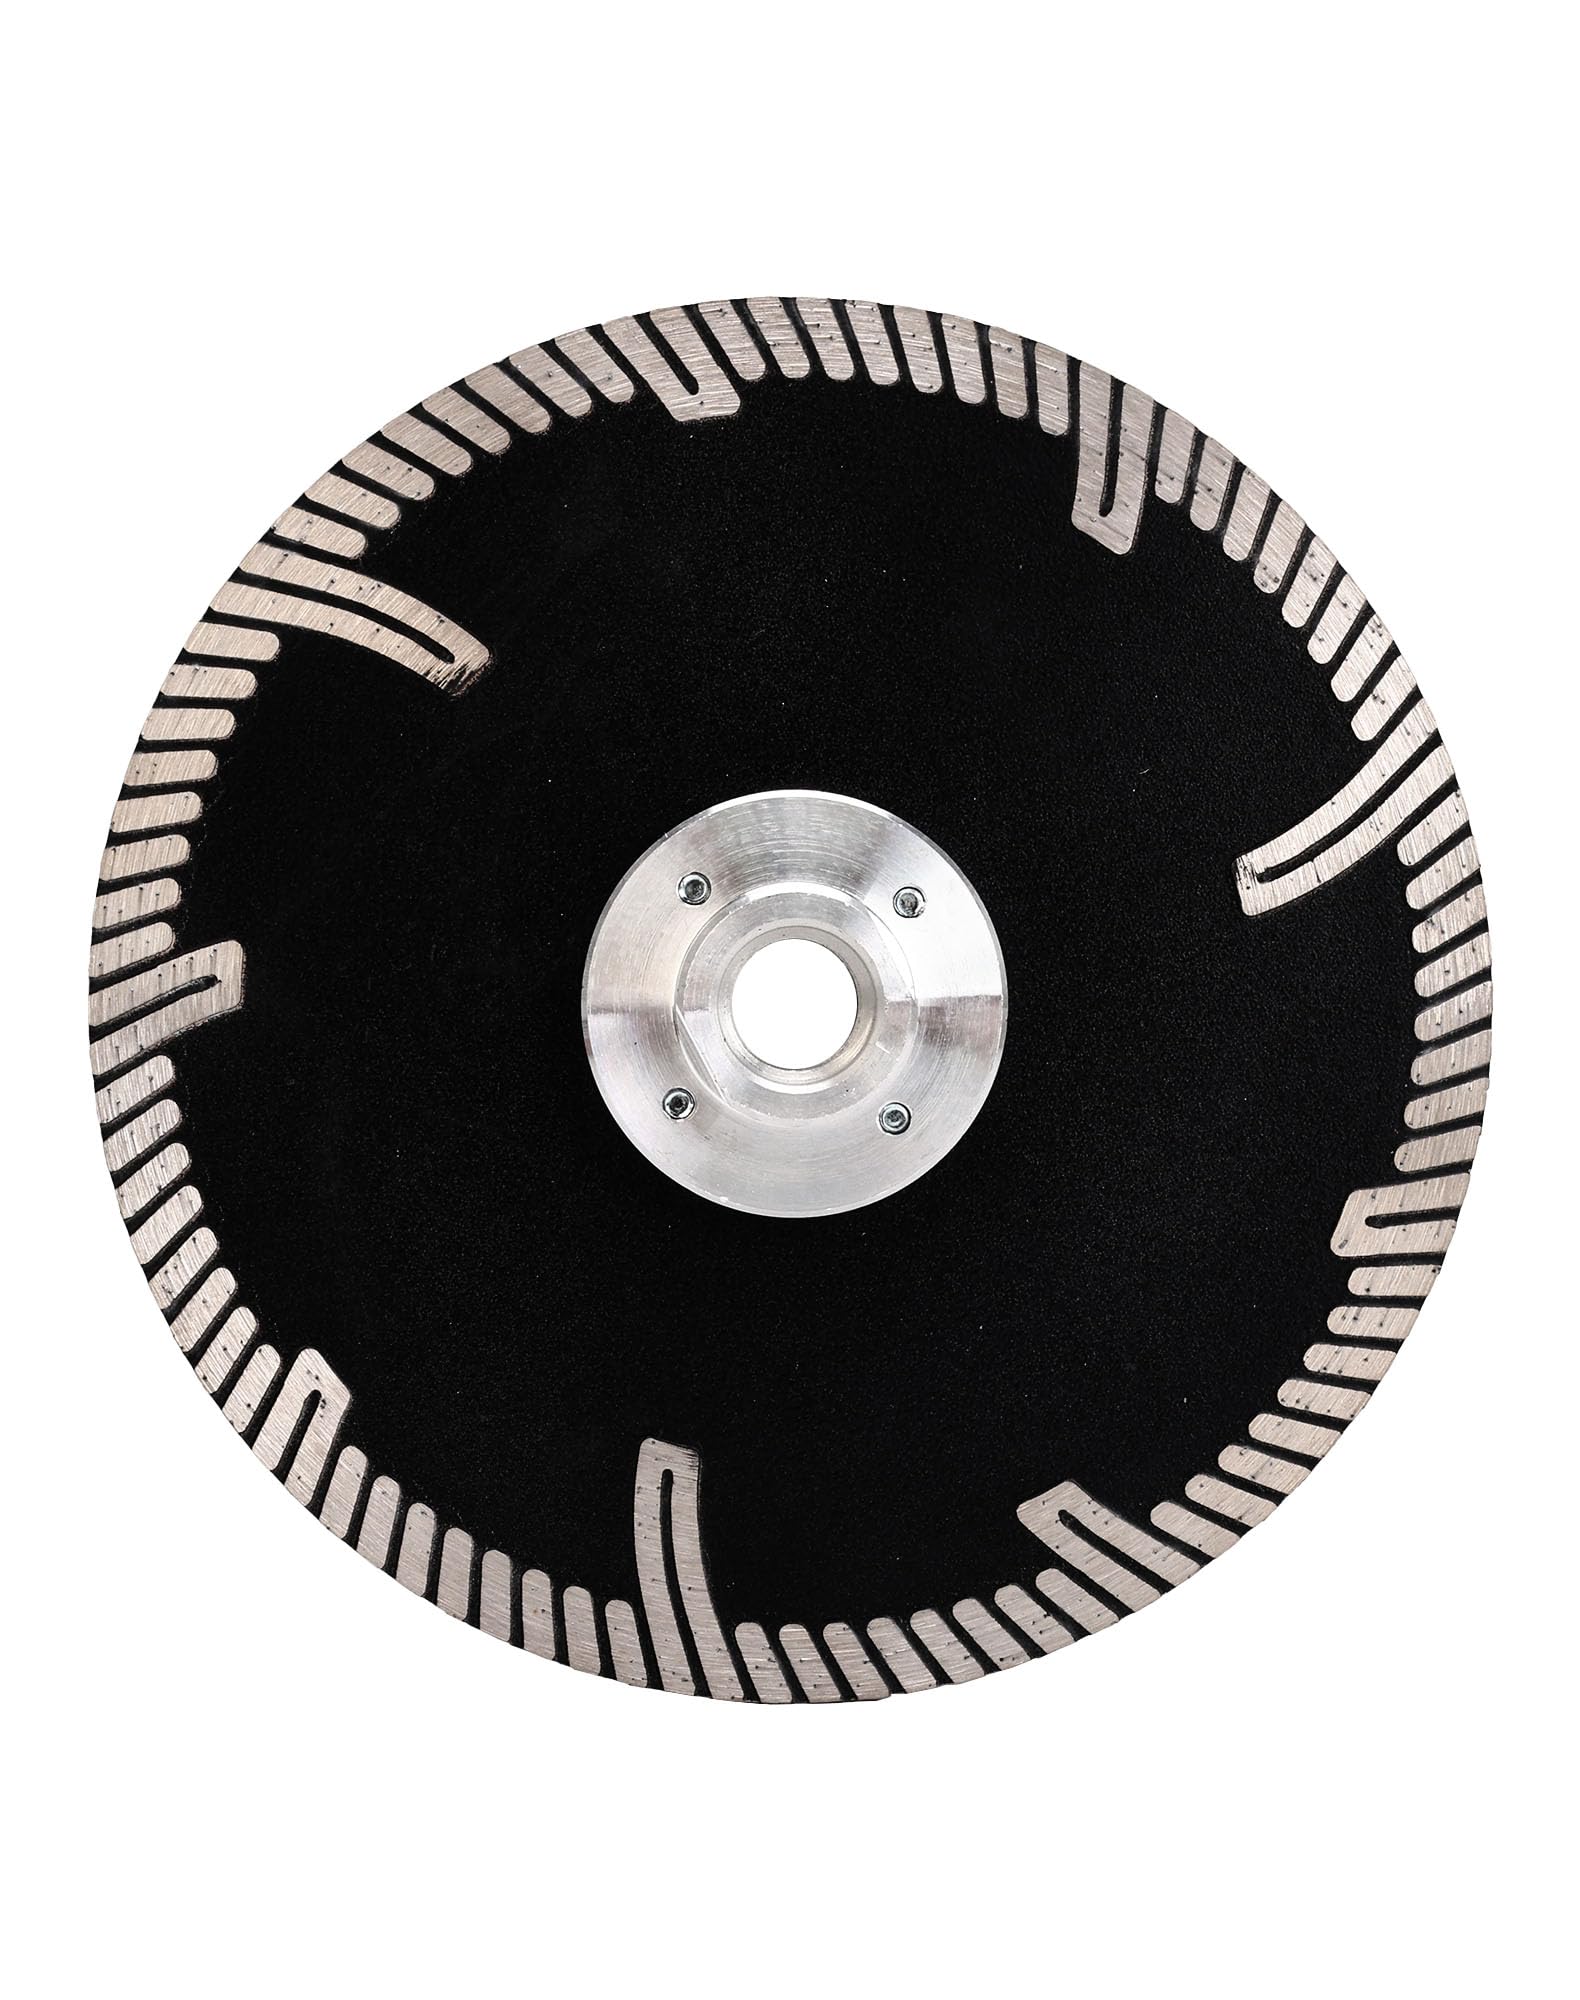 Casaverde 6" Granite Blade，Turbo Diamond Blade with Removable 5/8-11 Thread Cuts for Granite,Marble,Engineered Stone and Ceramic Tiles